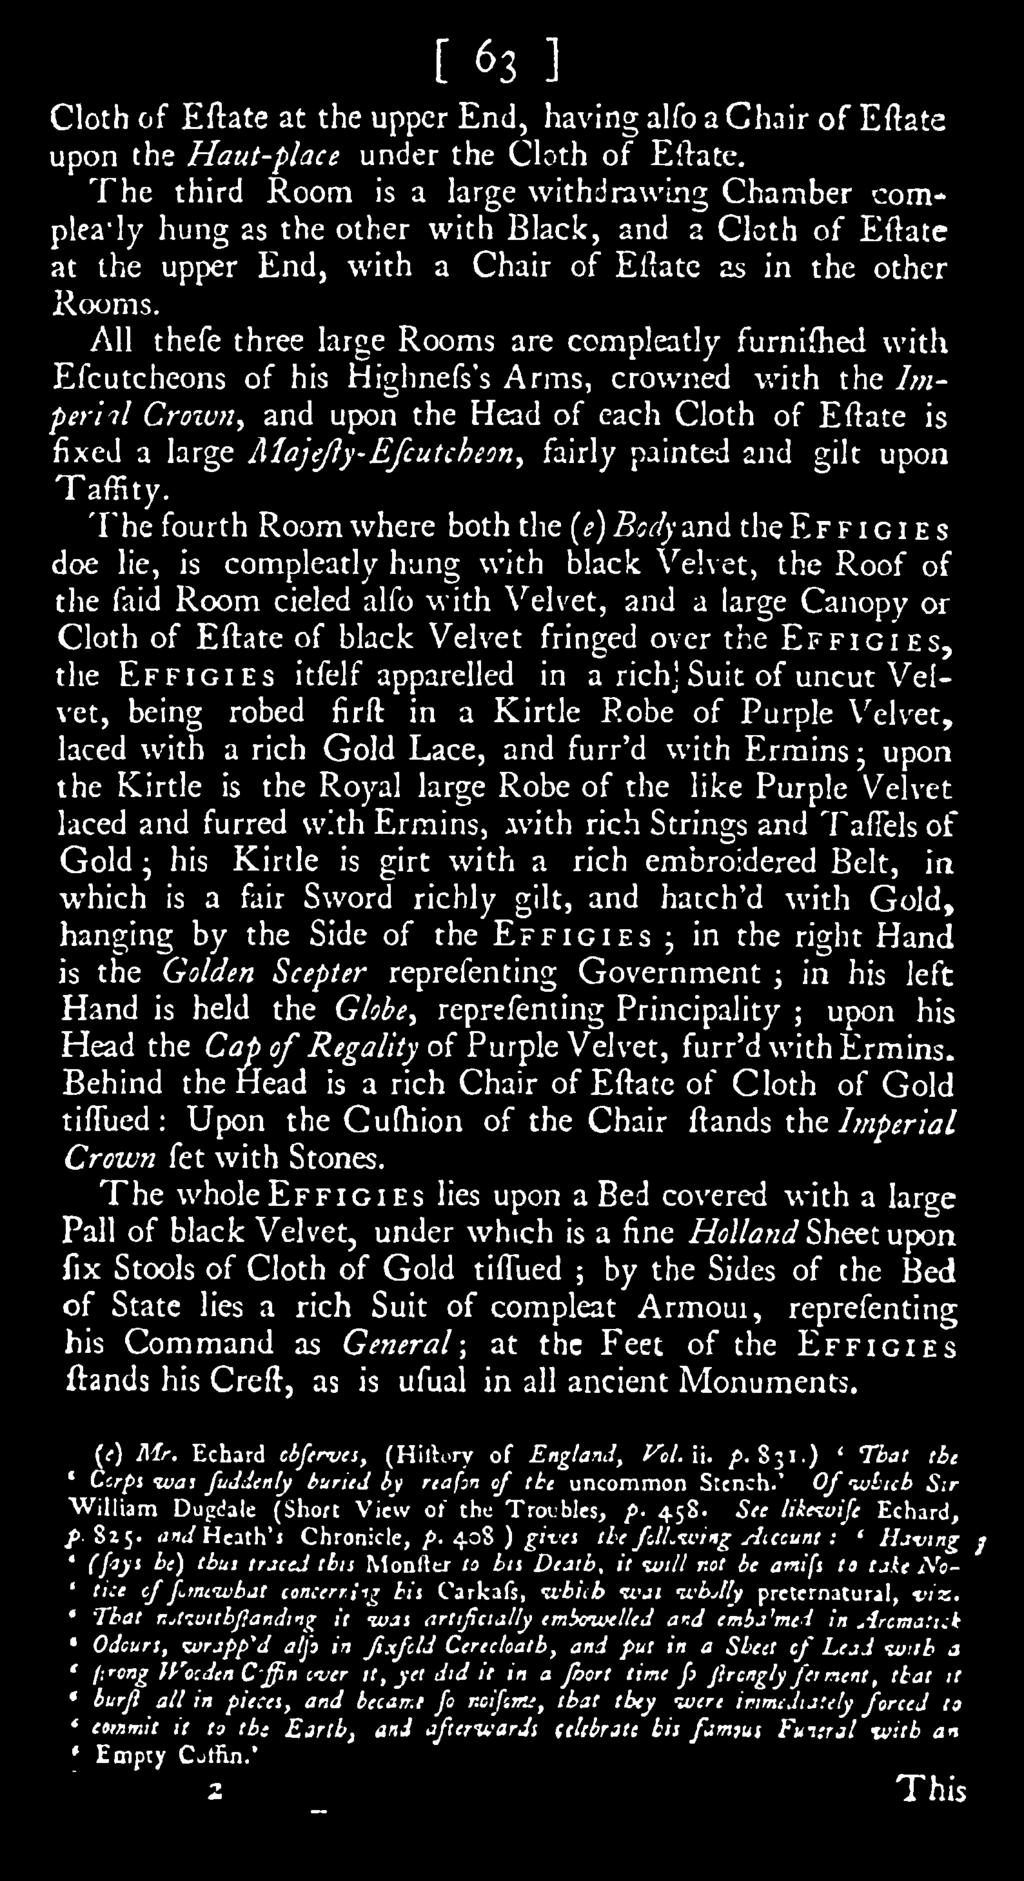 \et, the Roof of the laid Room cieled alfo with V^elvet, and a large Canopy or Cloth of Eftate of black Velvet fringed over the Effigies, the Effigies itfelf apparelled in a richj Suit of uncut